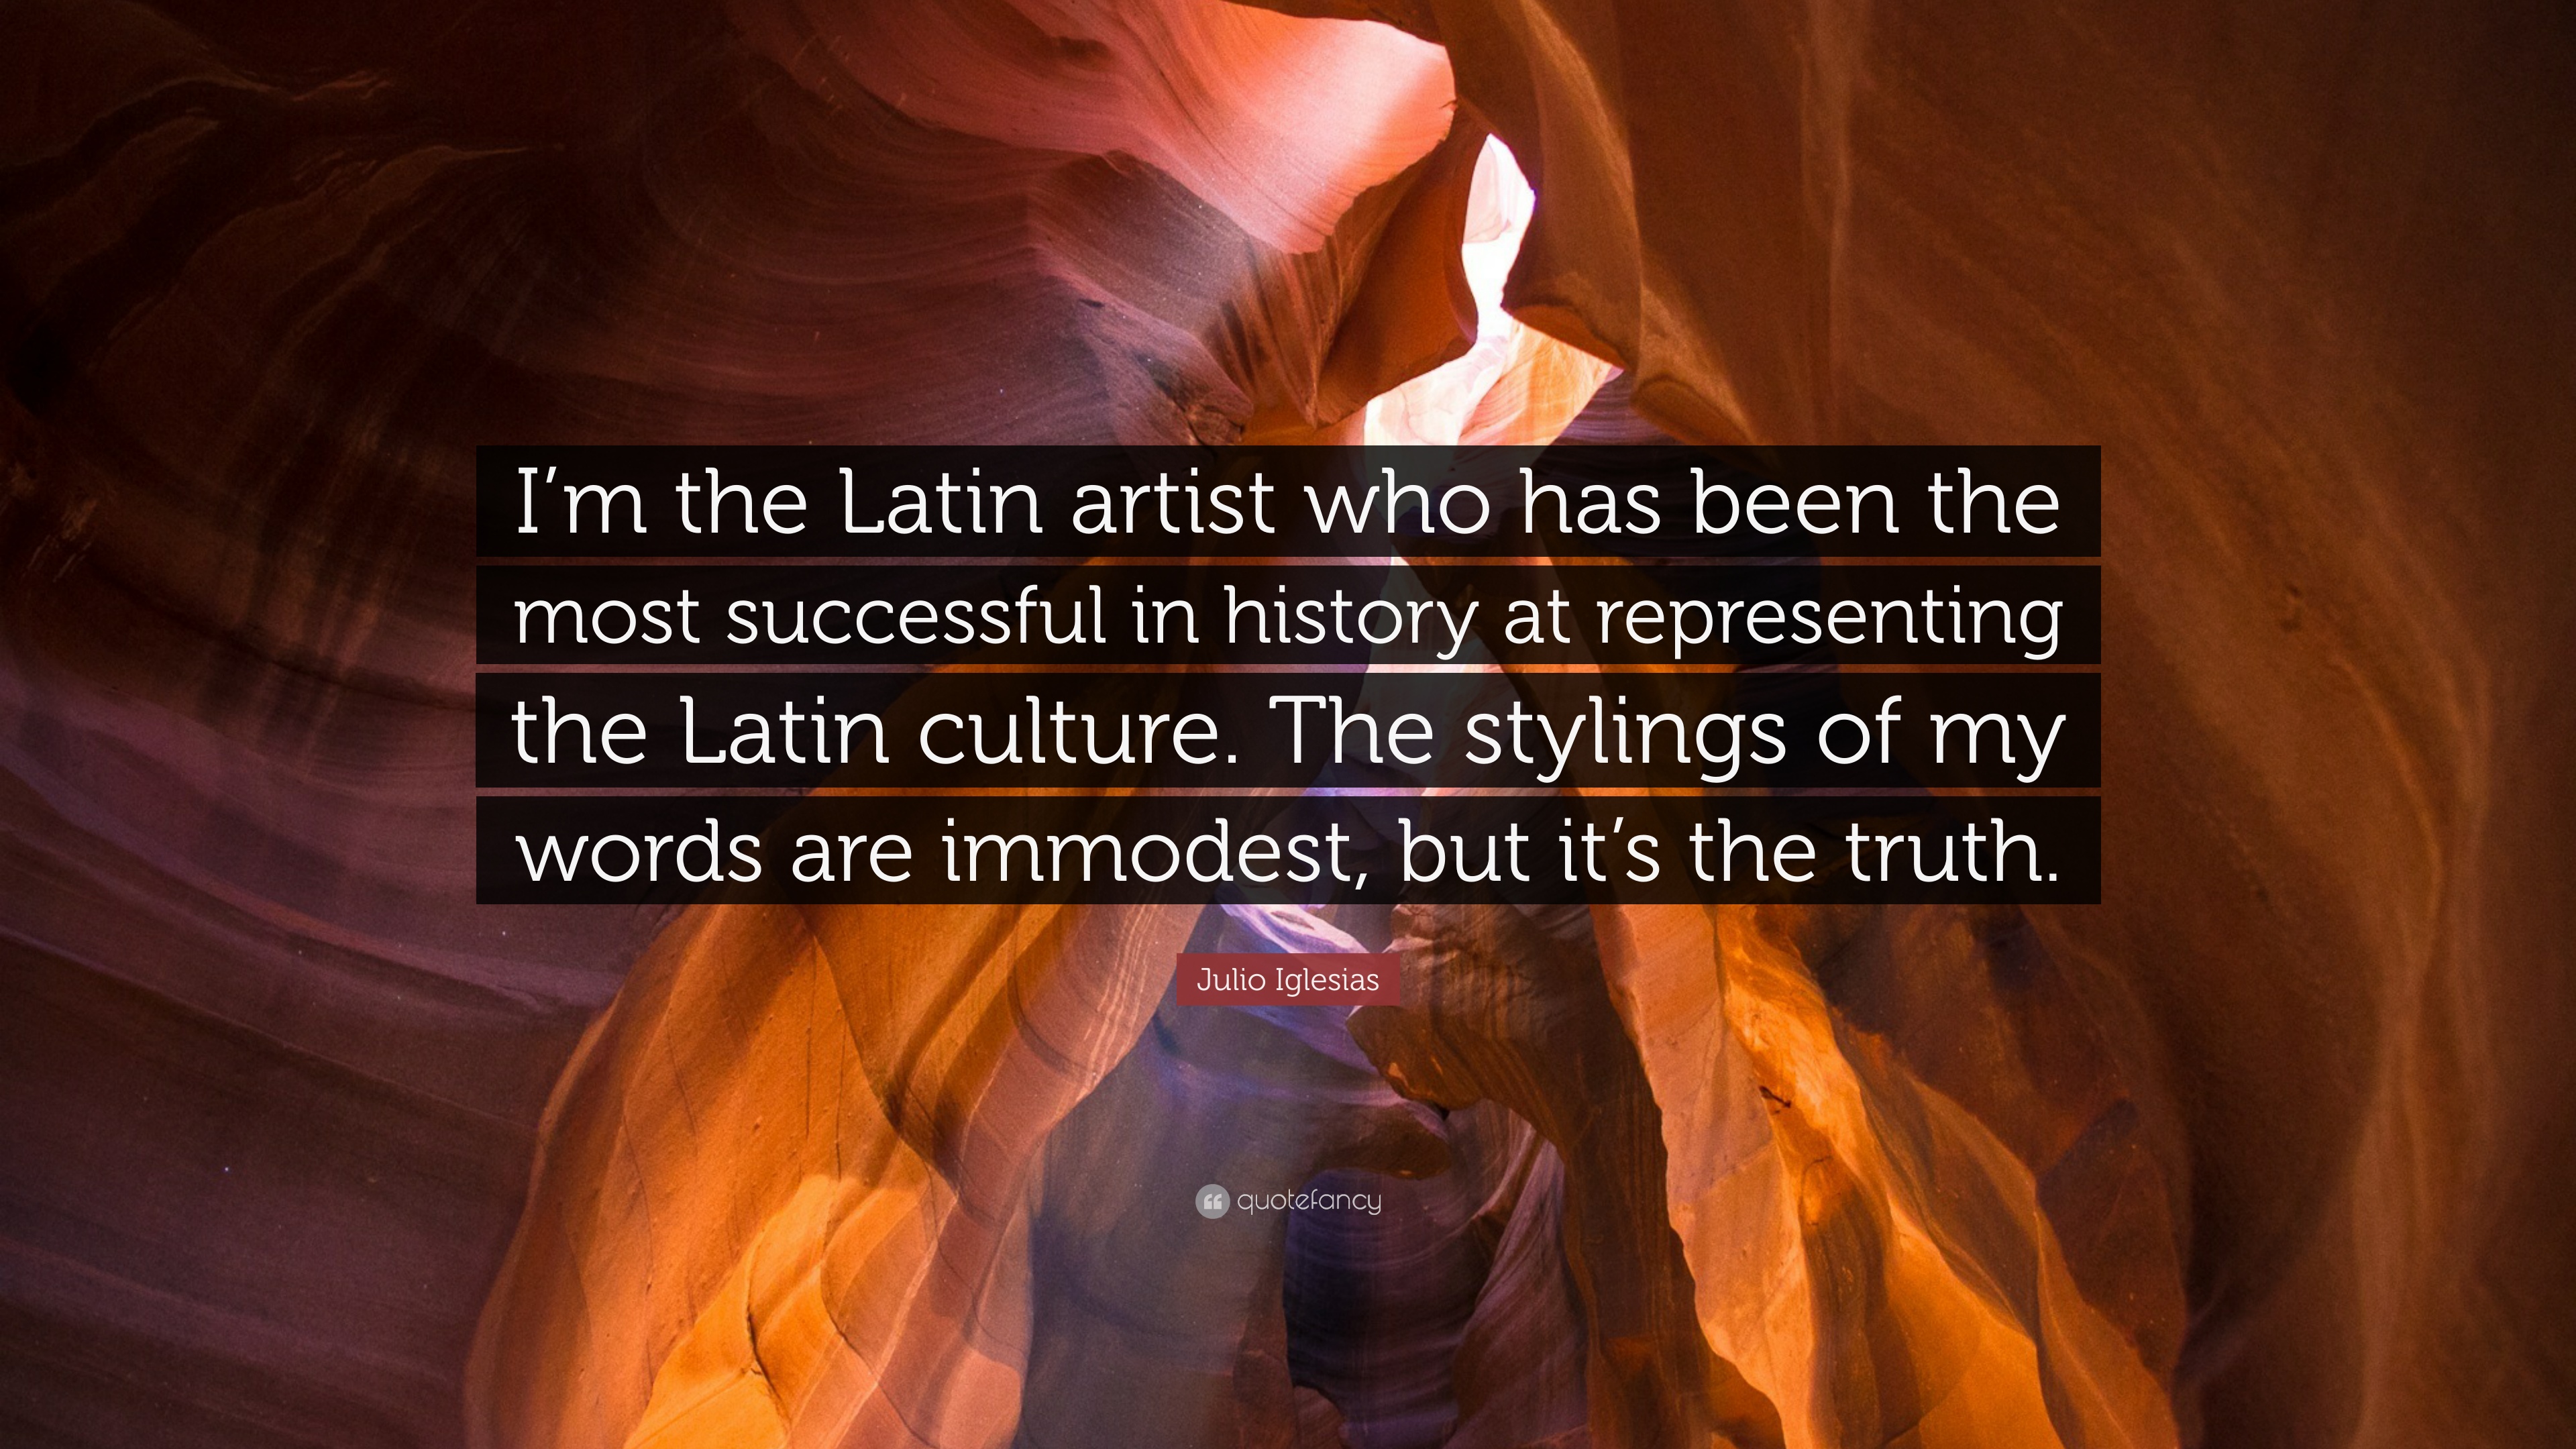 Julio Iglesias Quote: "I'm the Latin artist who has been the most...